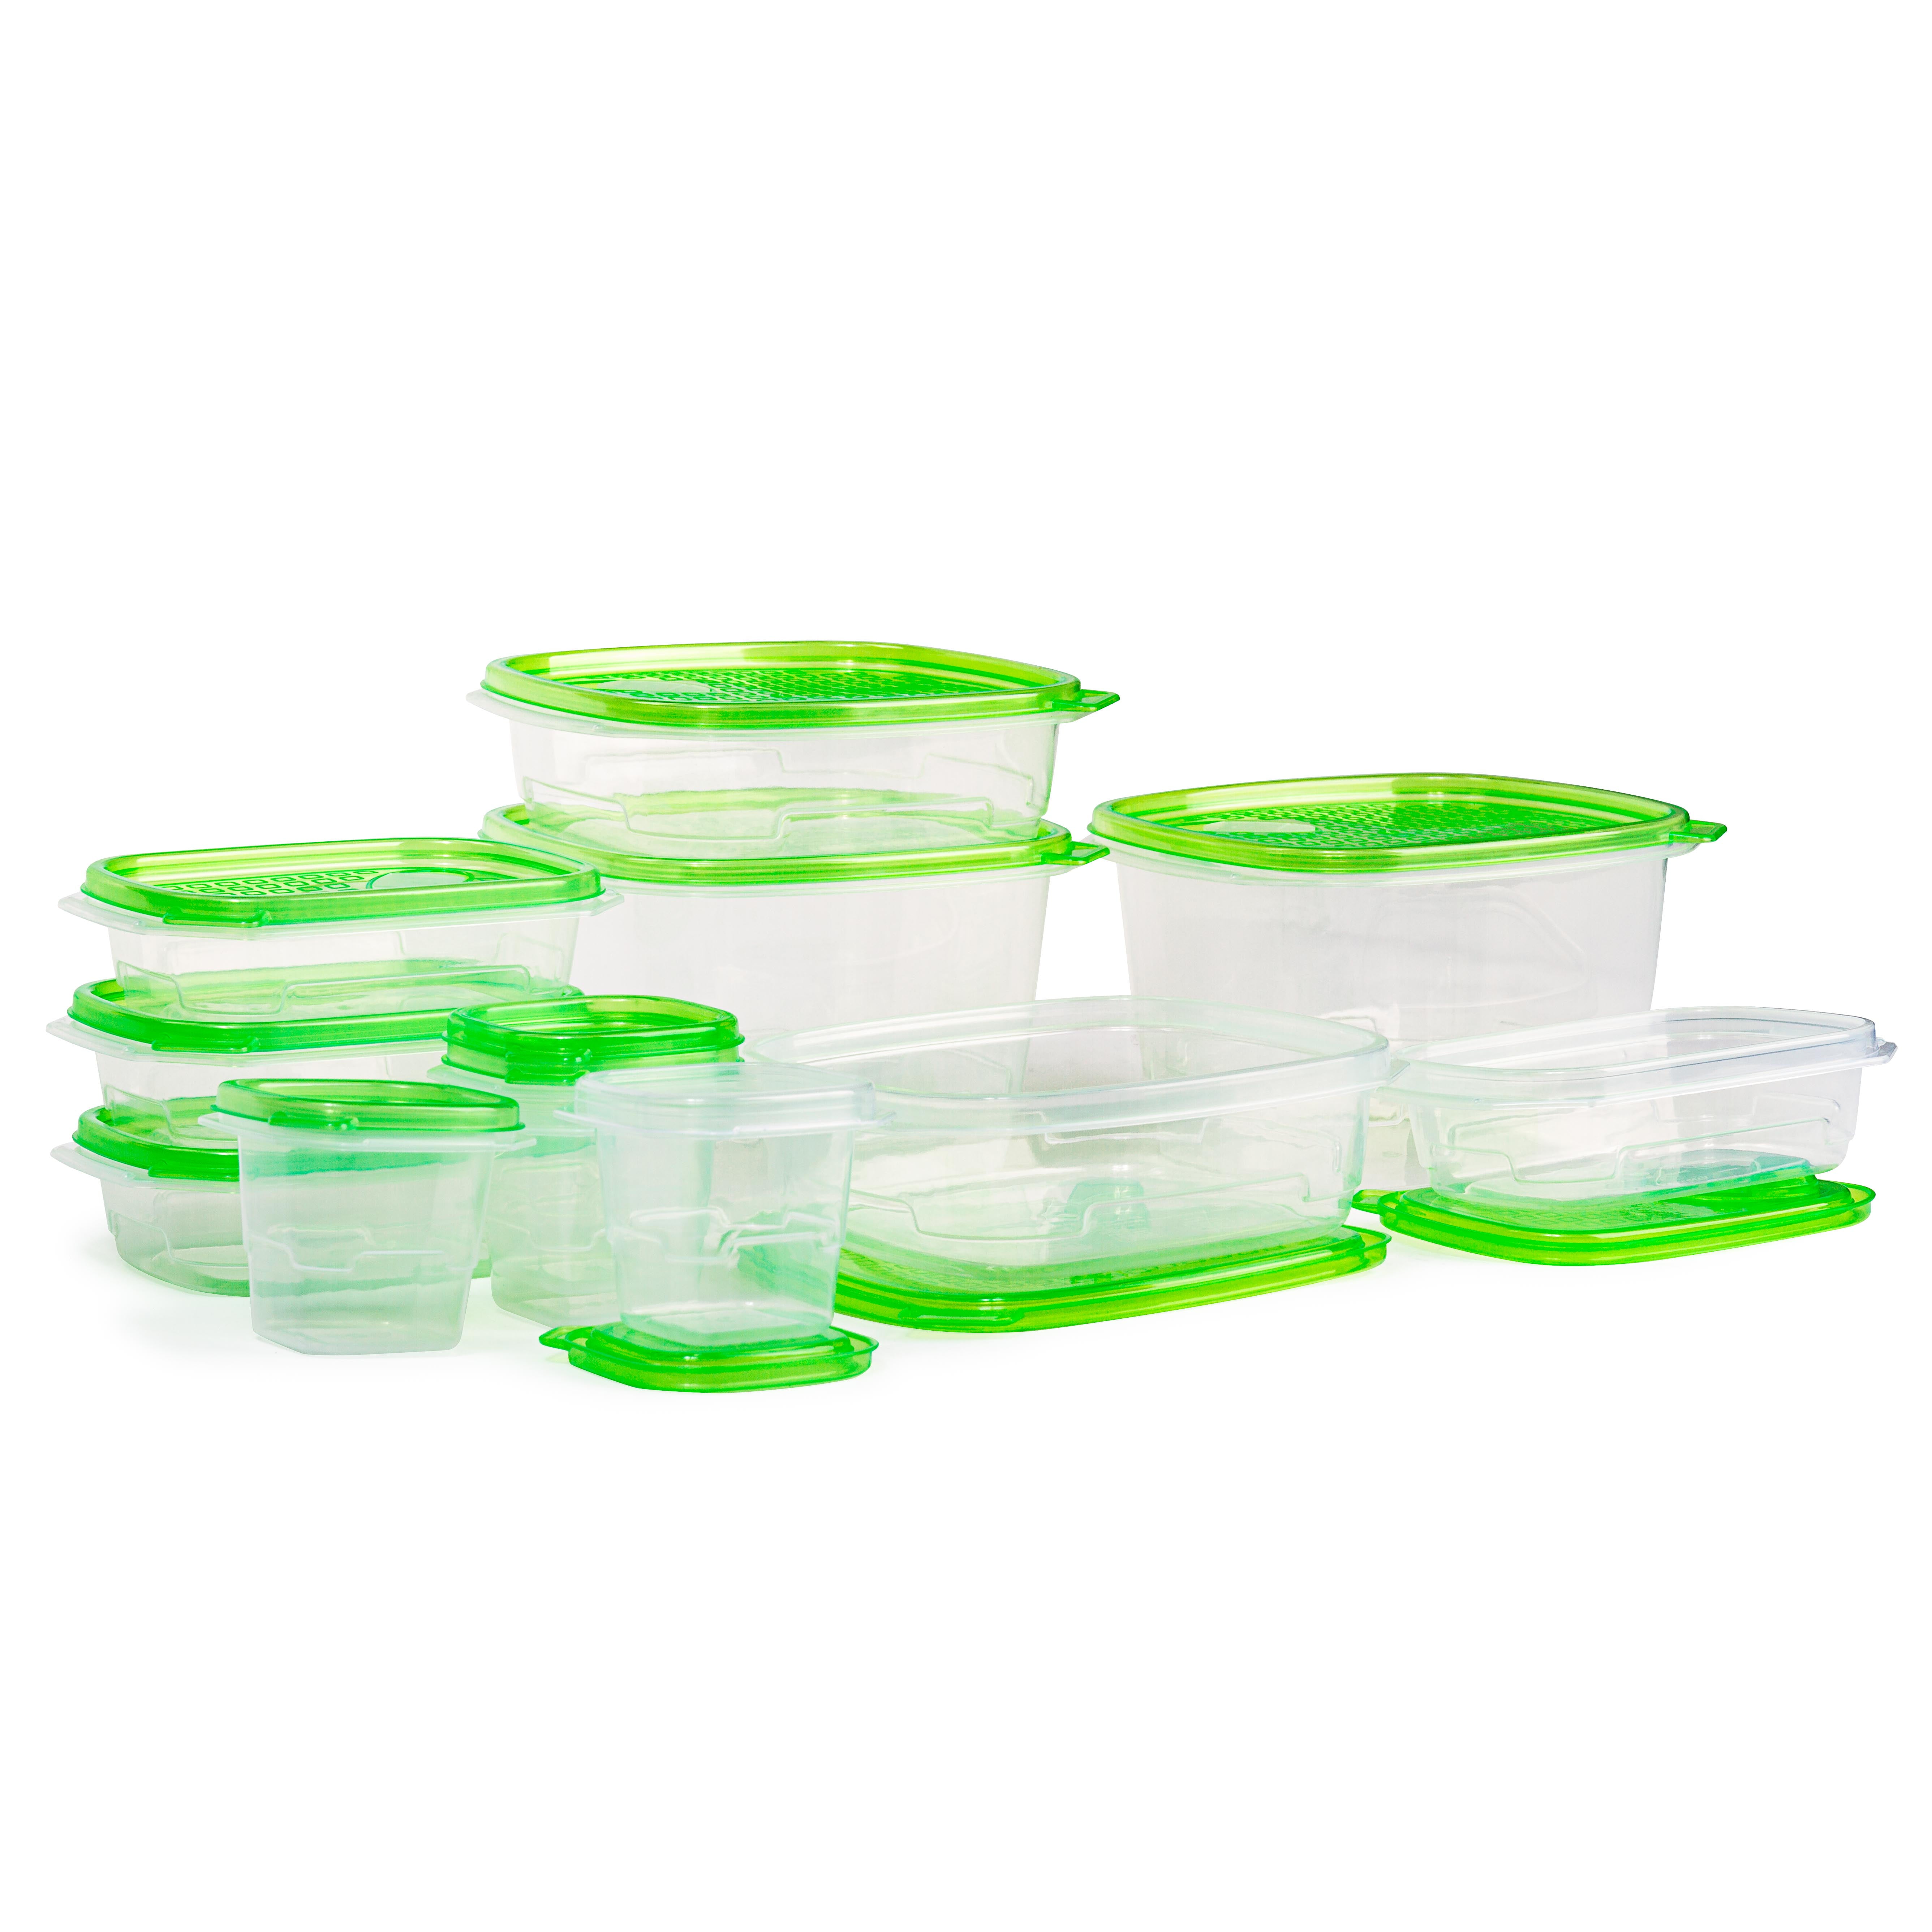 Set of Plastic Containers for Storing Liquid Household Chemicals